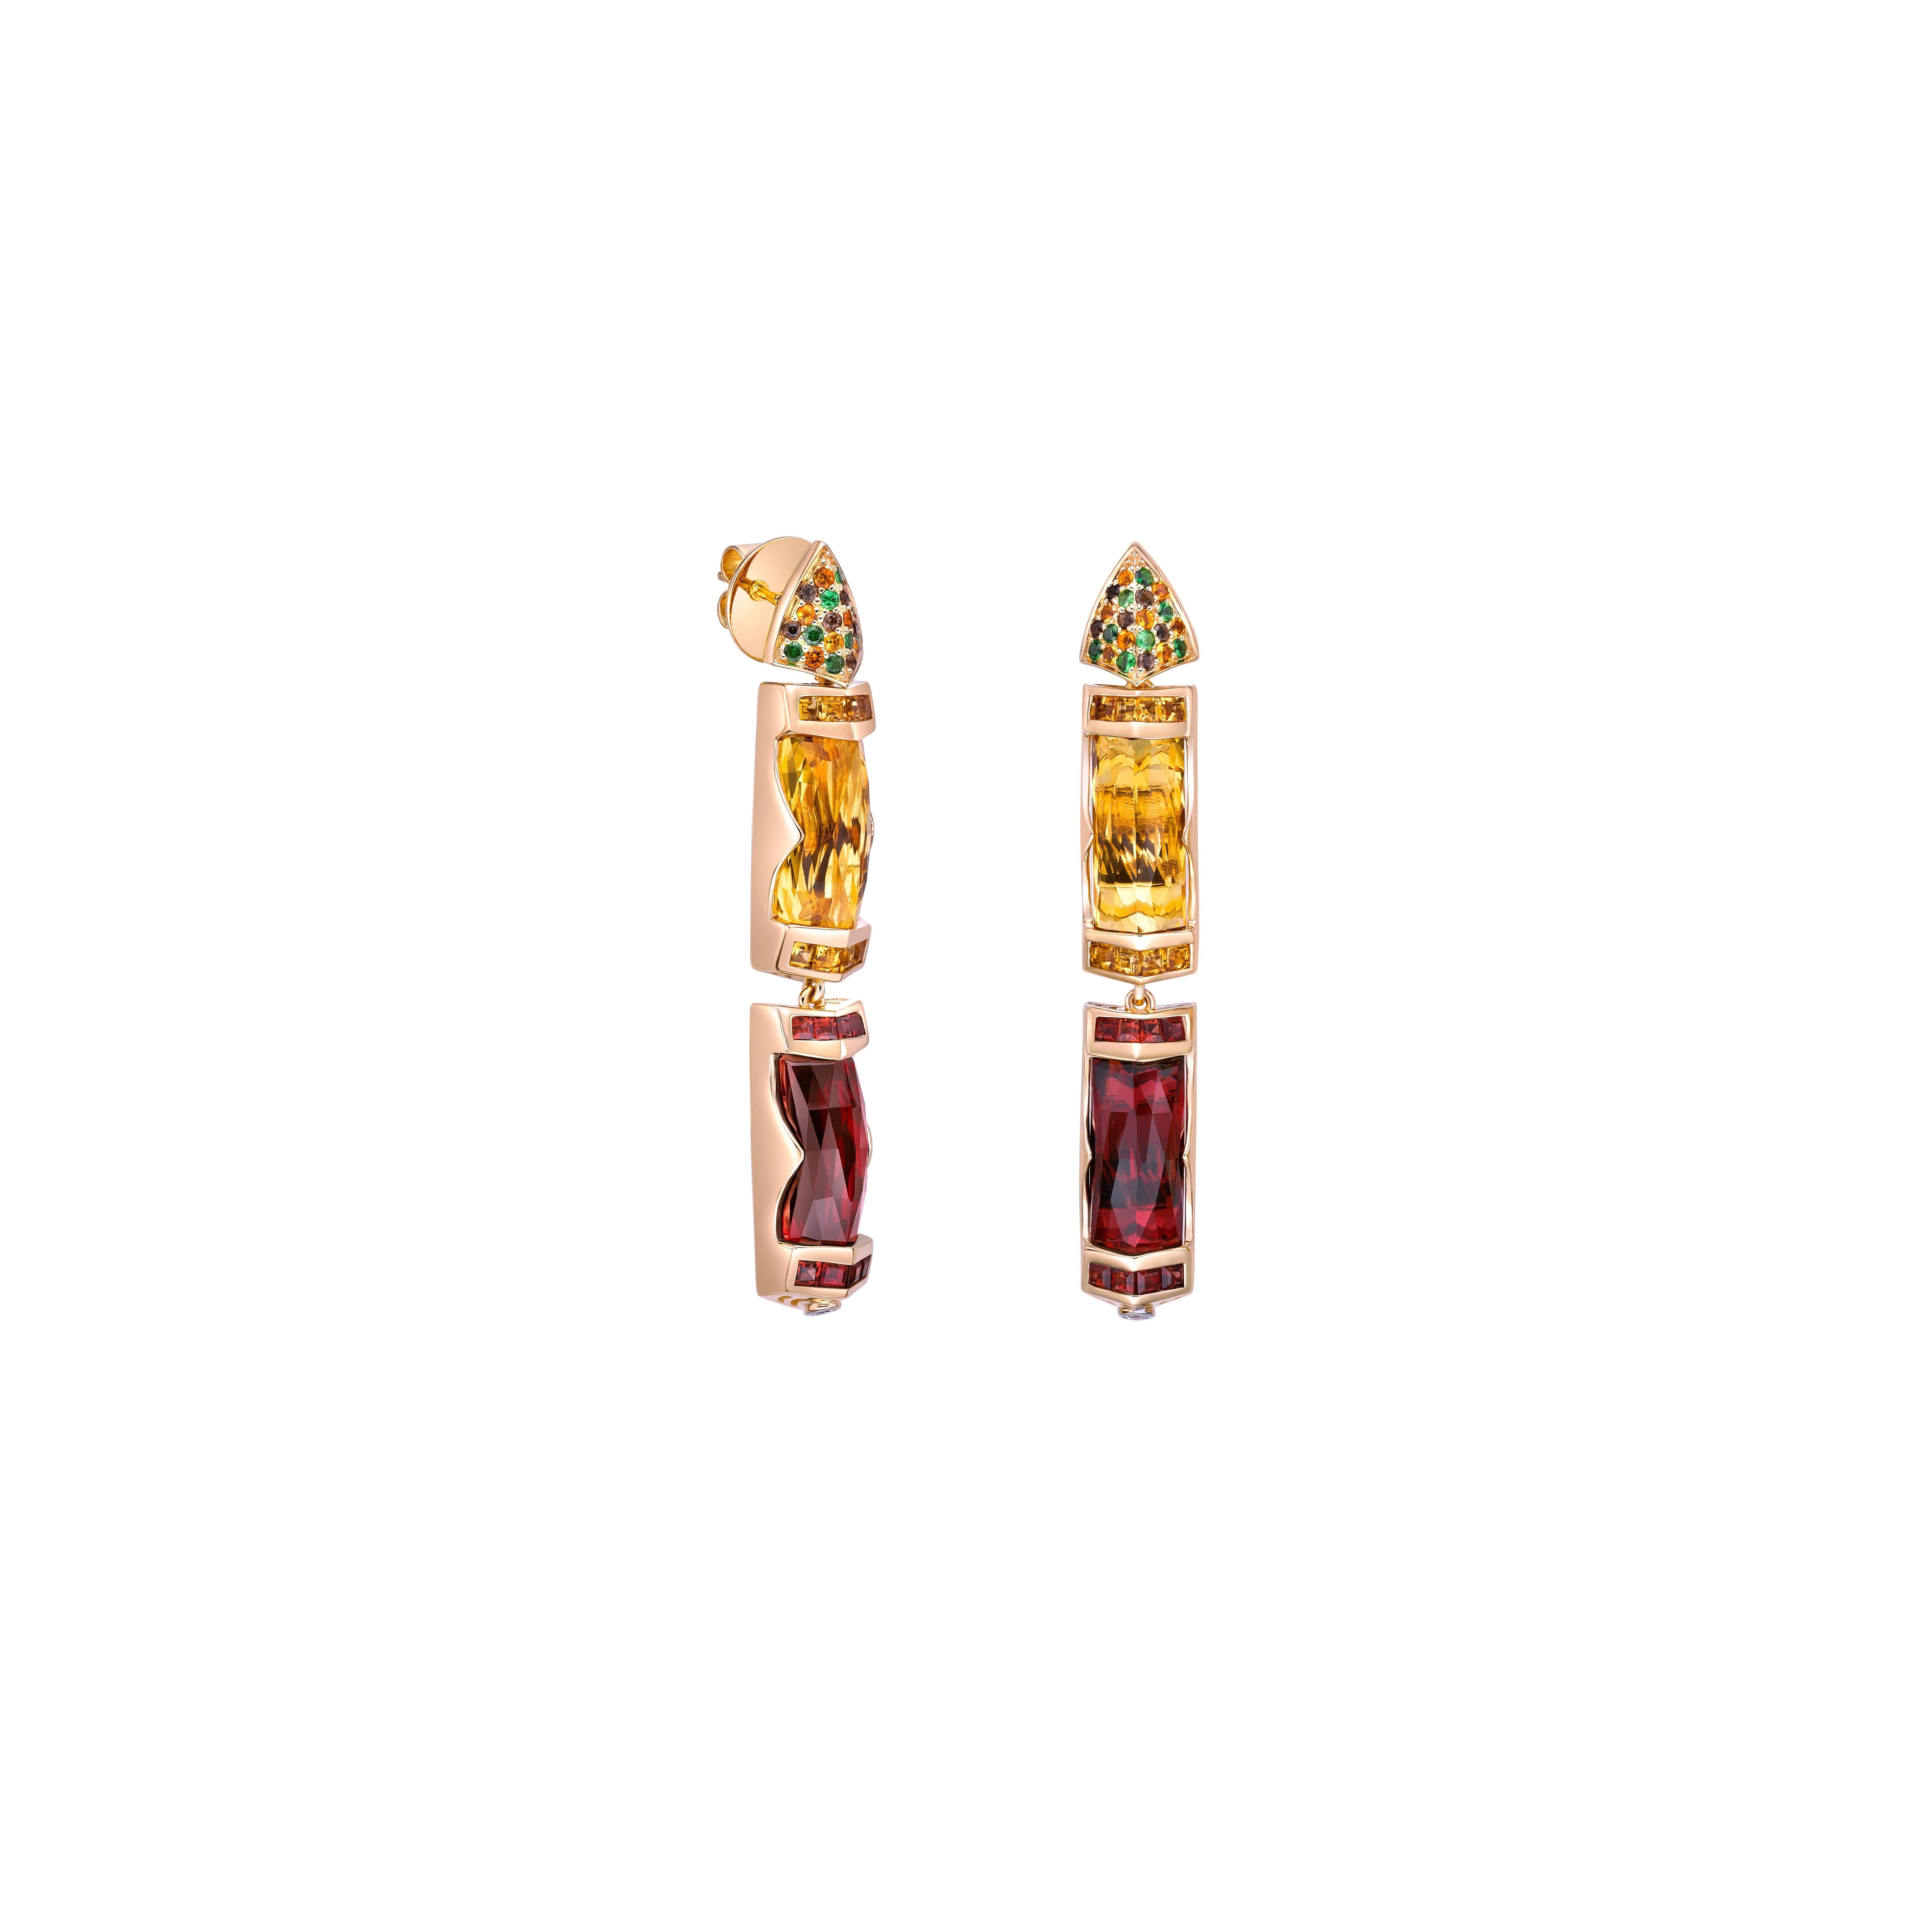 Presented A lovely Drop Earrings of Garnet and Honey Quartz is perfect for people who want to wear it to any occasion or celebration. garnet, citrine, smoky quartz and tsavorite embellishments on Top add to the earrings artistic and beautiful